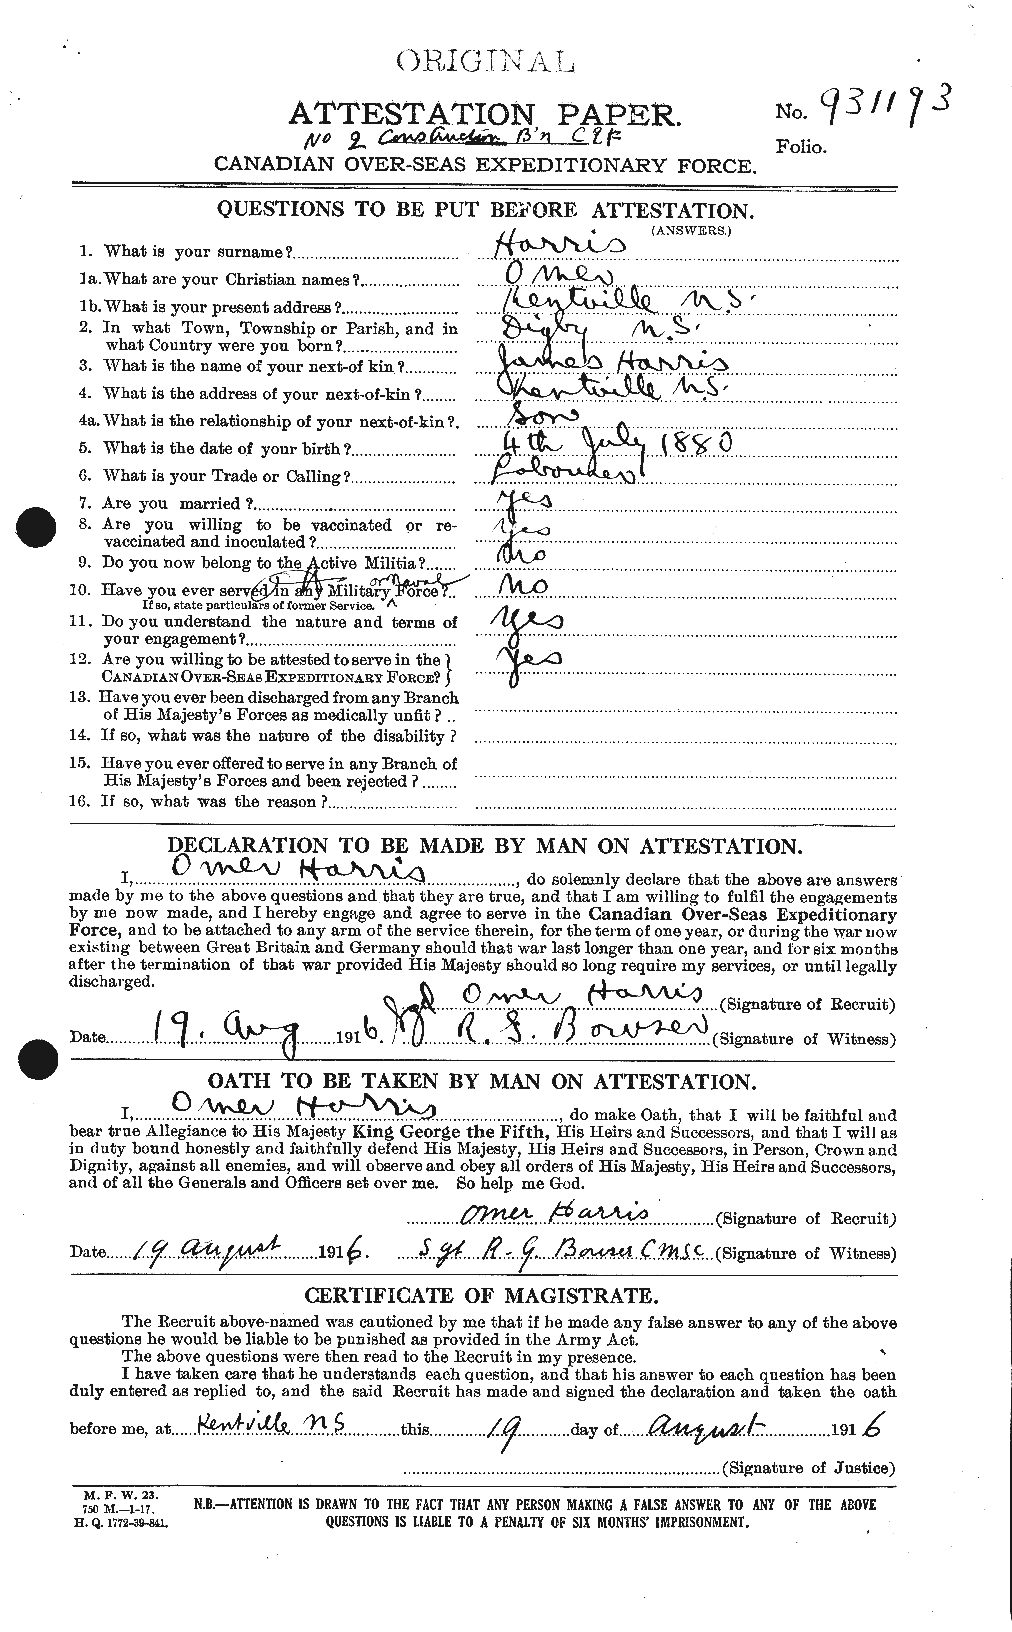 Personnel Records of the First World War - CEF 378086a